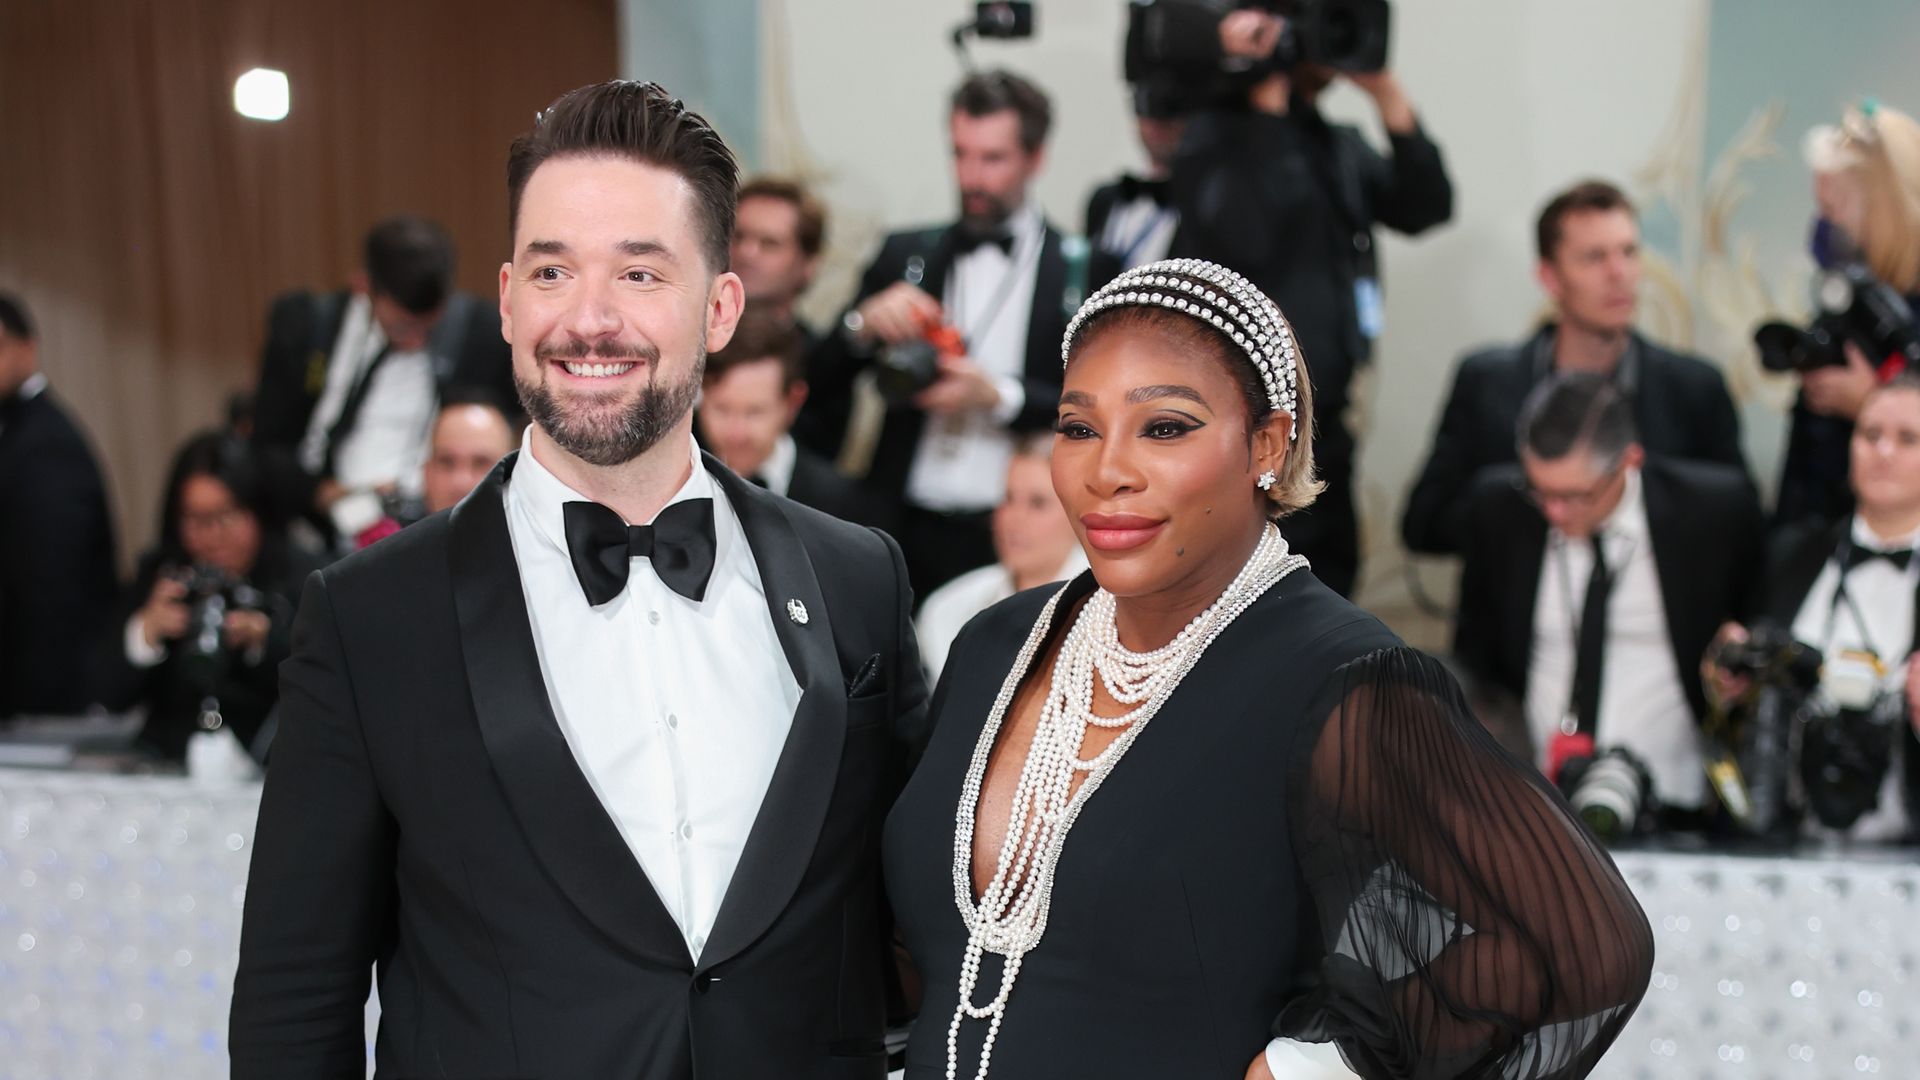 Alexis Ohanian and Serena Williams on red carpet in black tie